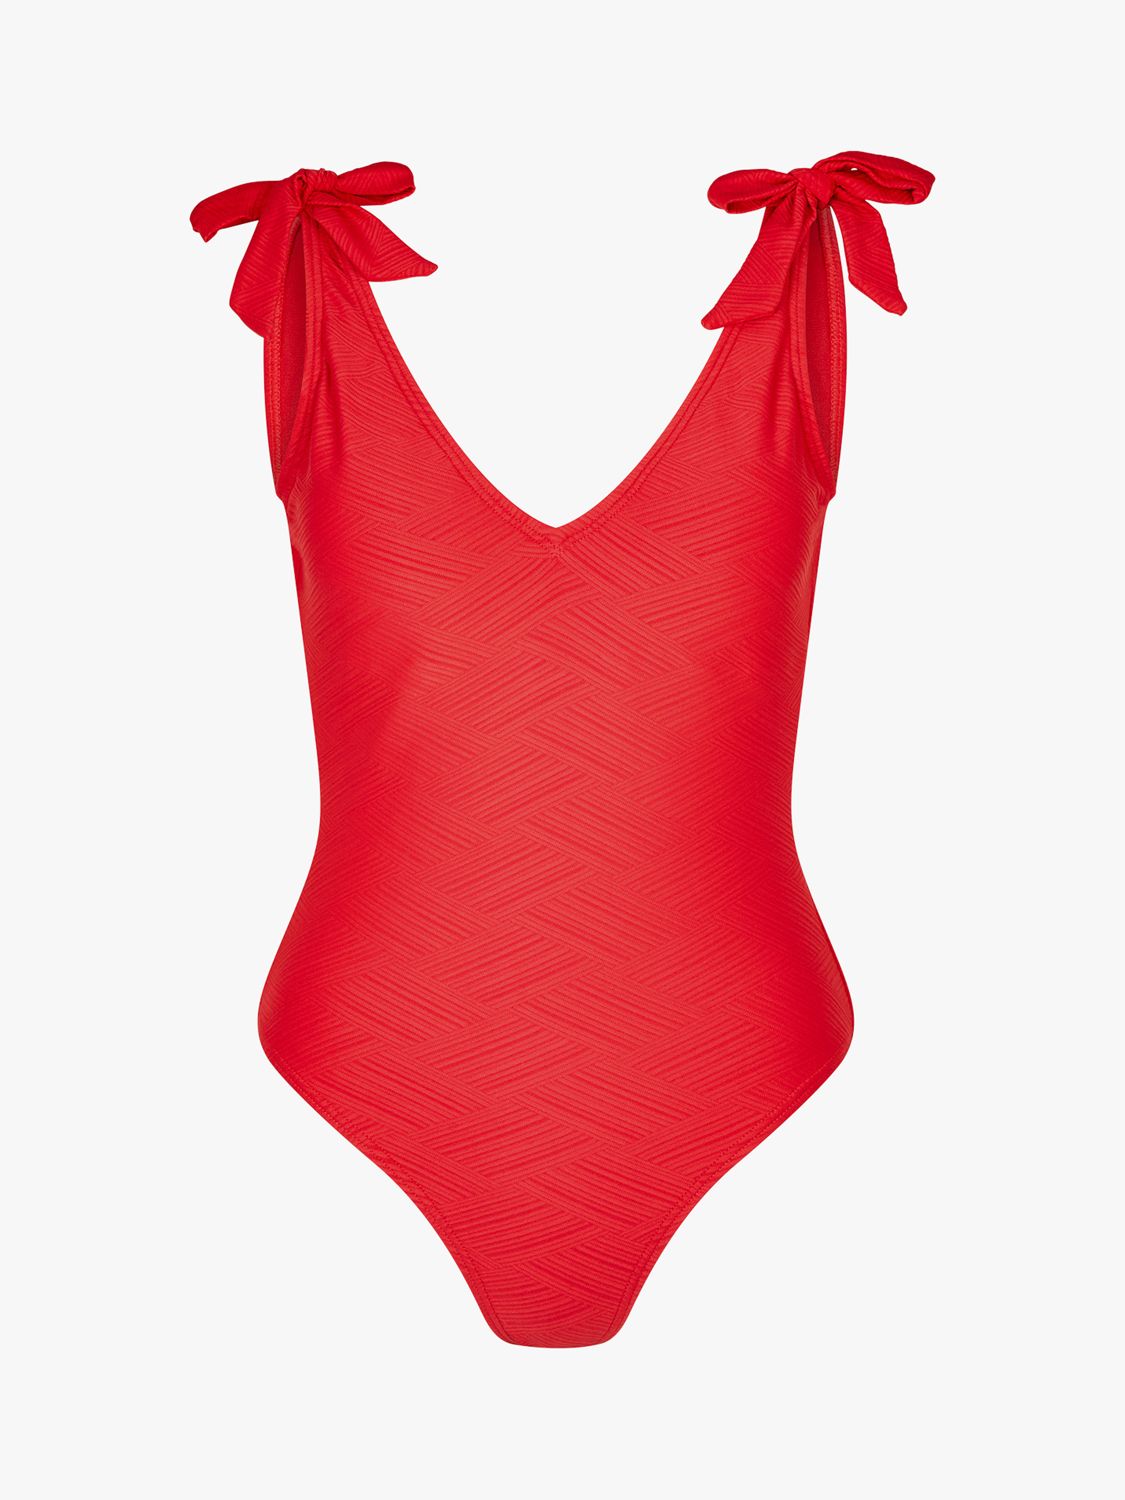 Accessorize Textured Tie Detail Swimsuit, Red, 8